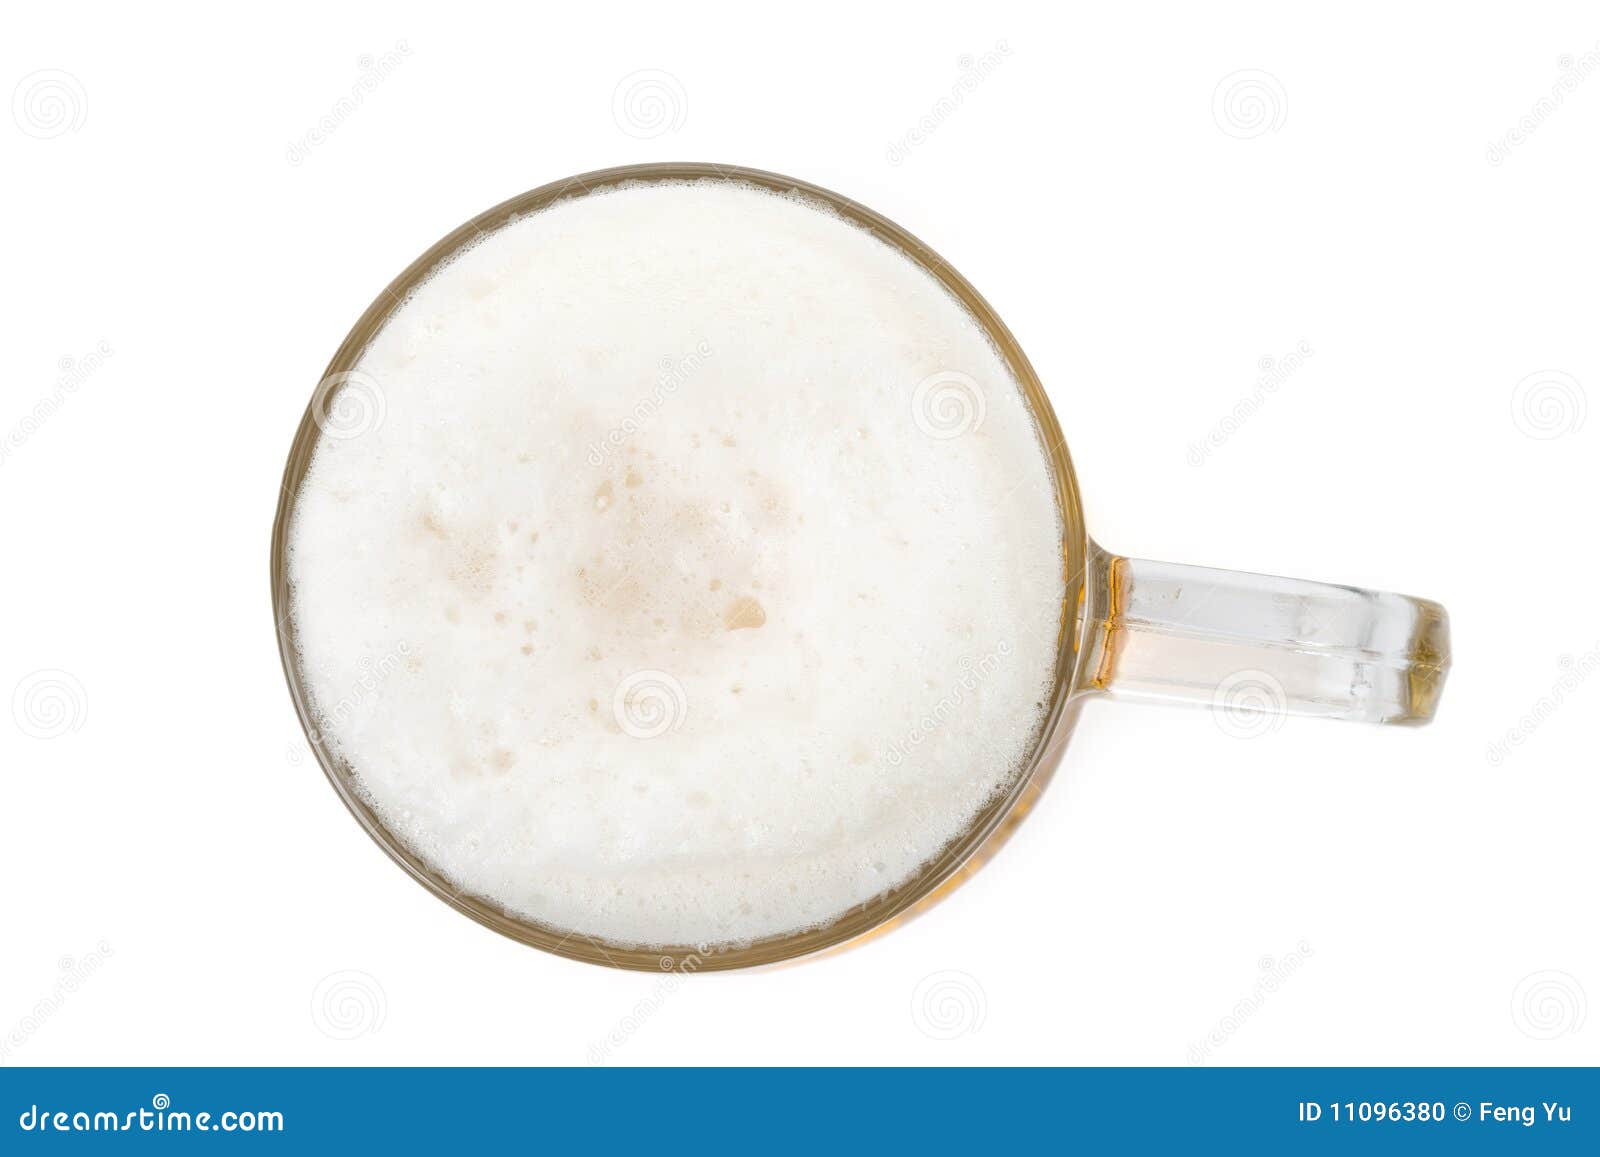 beer froth